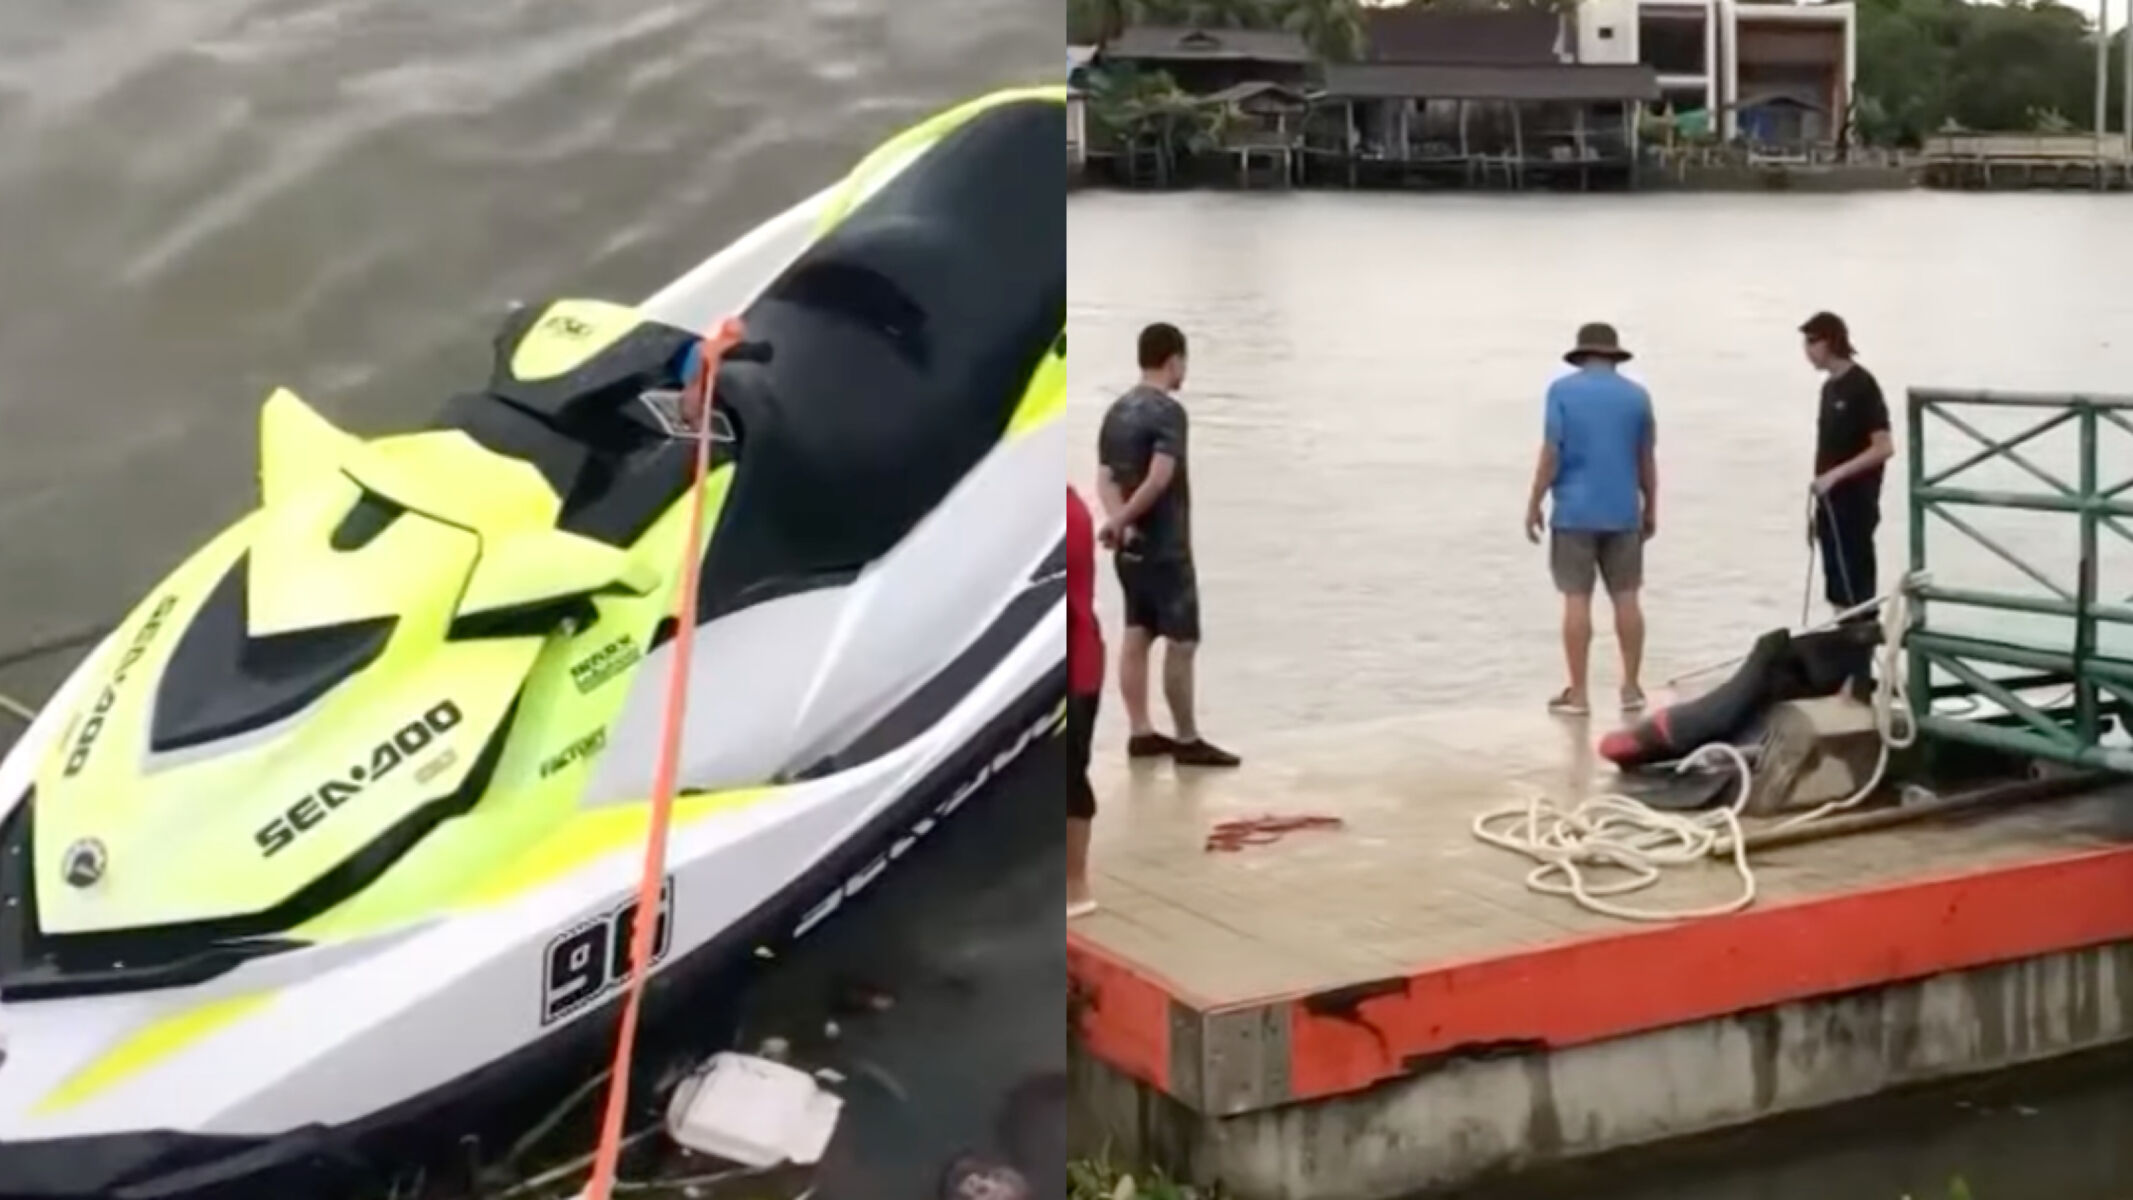 Man’s costly error sees pick-up truck and jet ski plunge into Mae Klong River